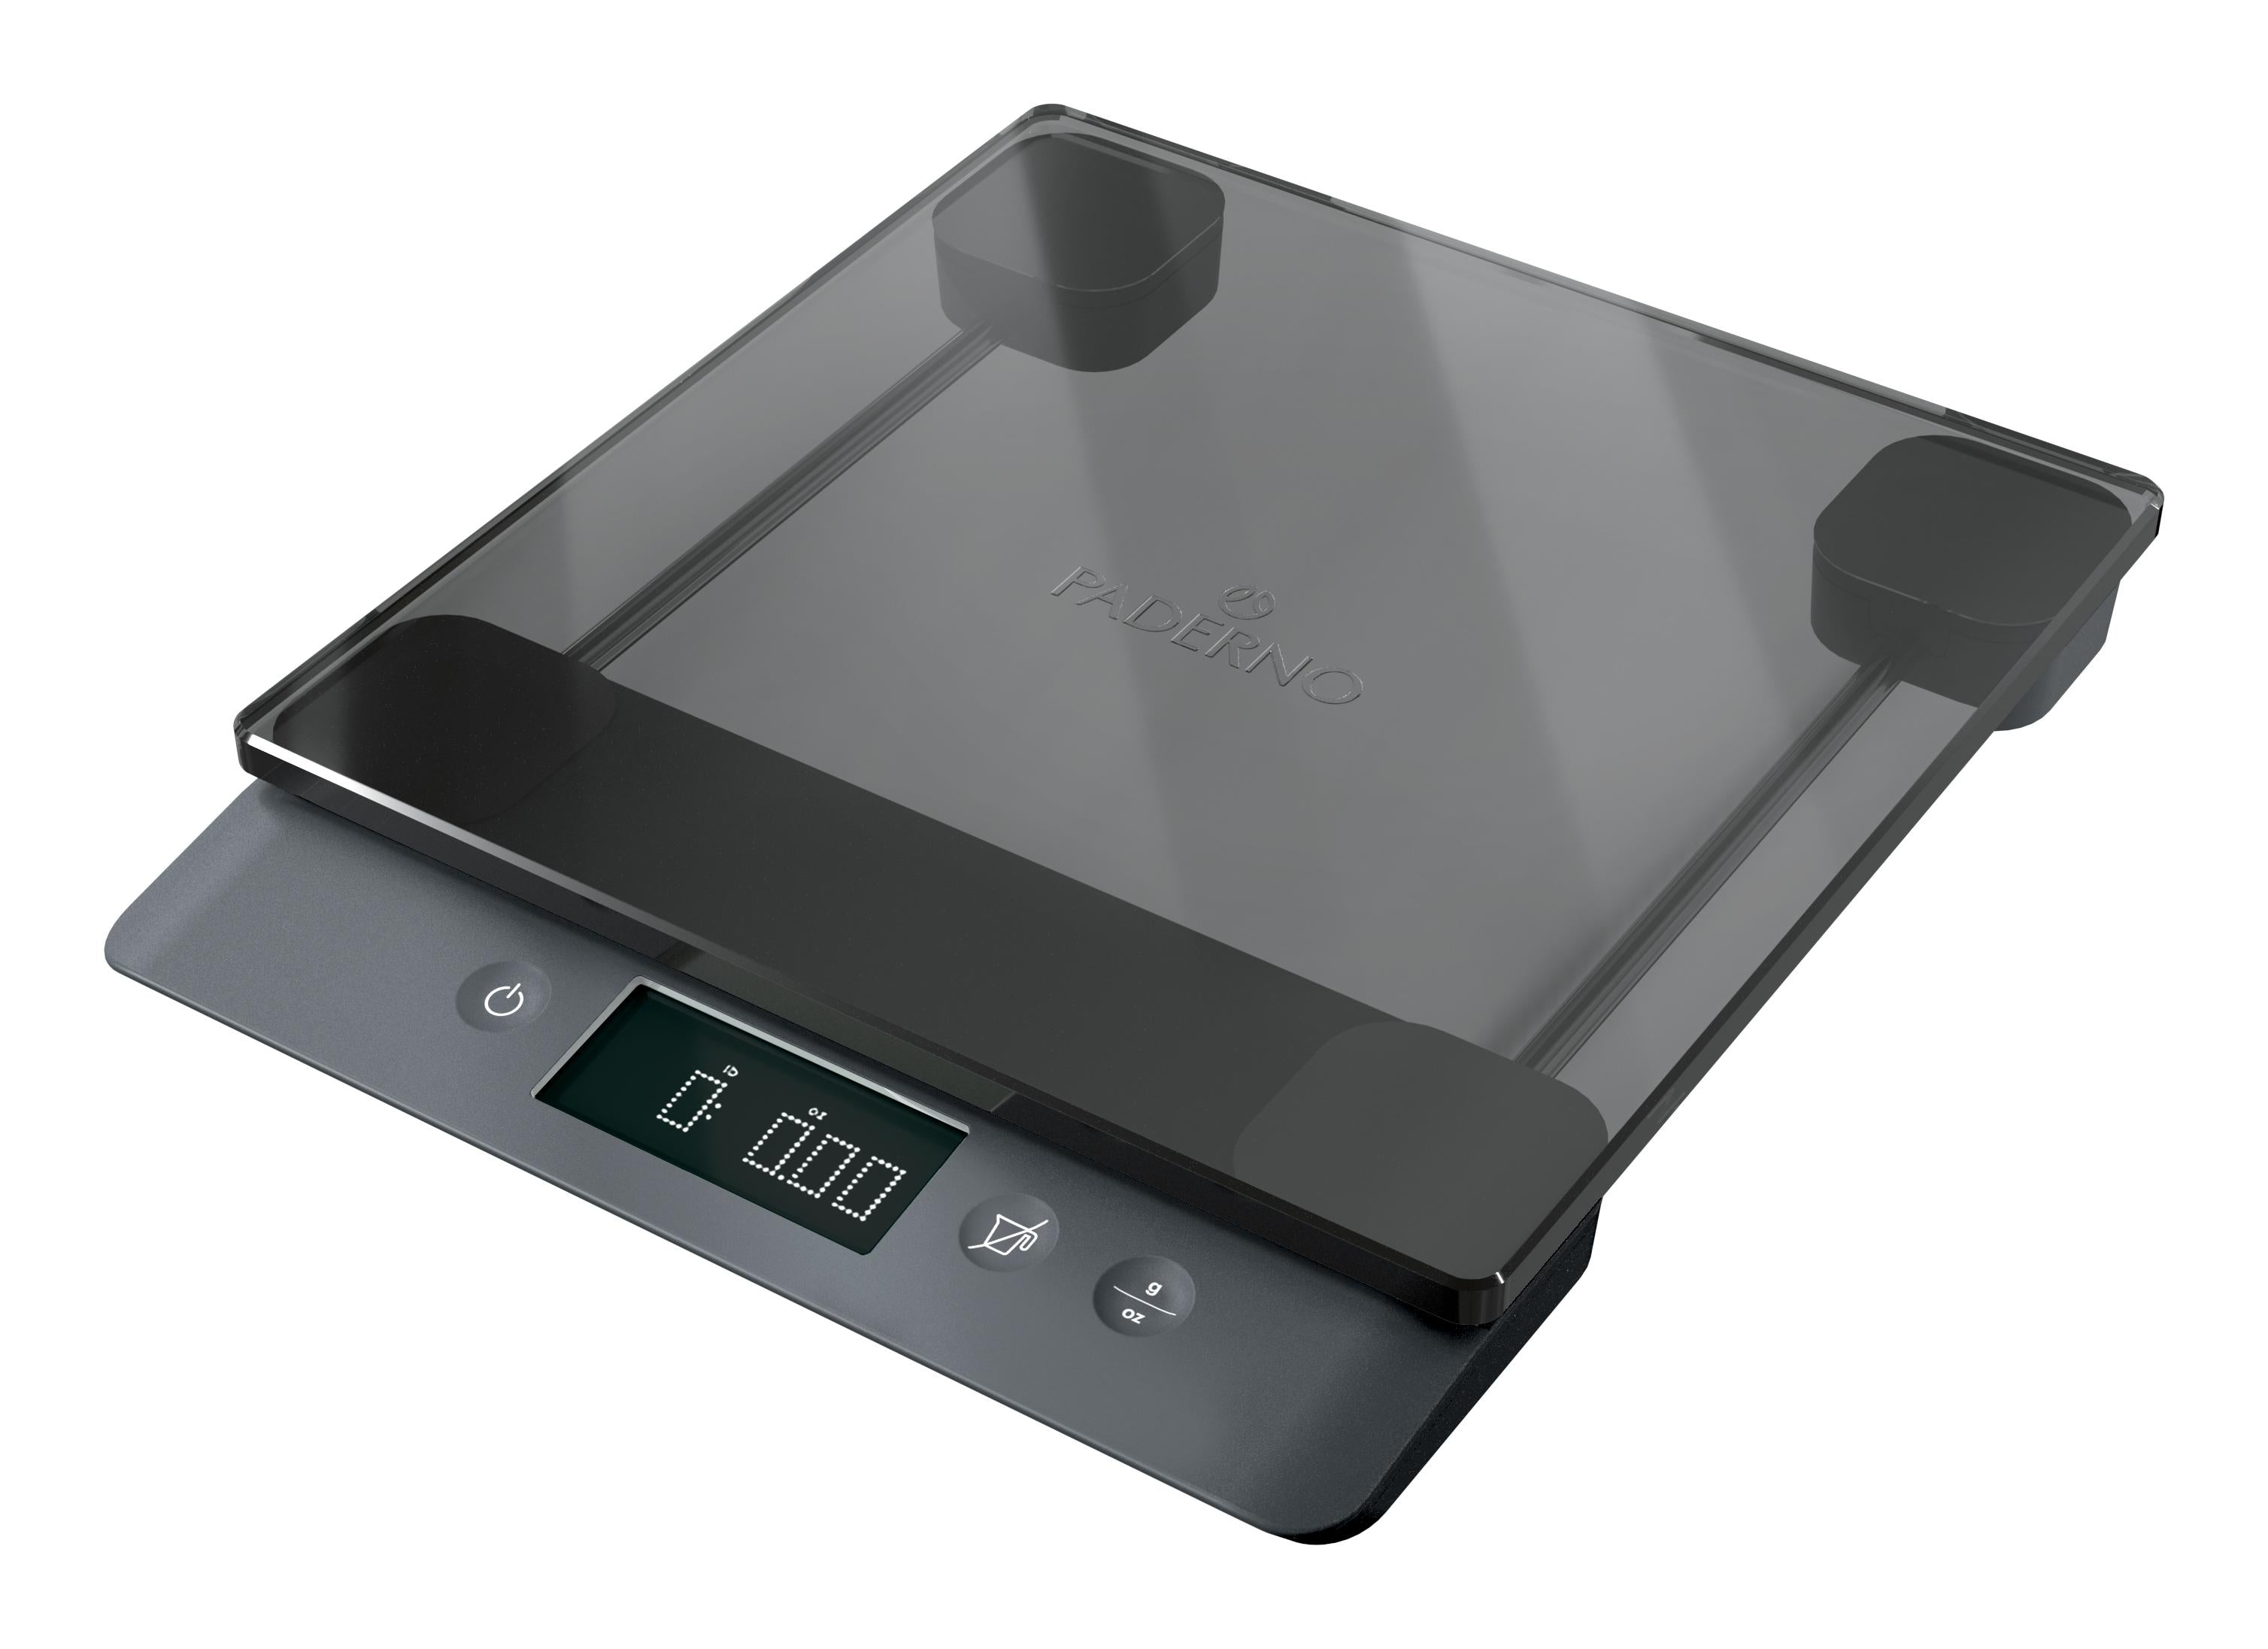 Vida by PADERNO USB Rechargeable Kitchen Scale, 11-lb